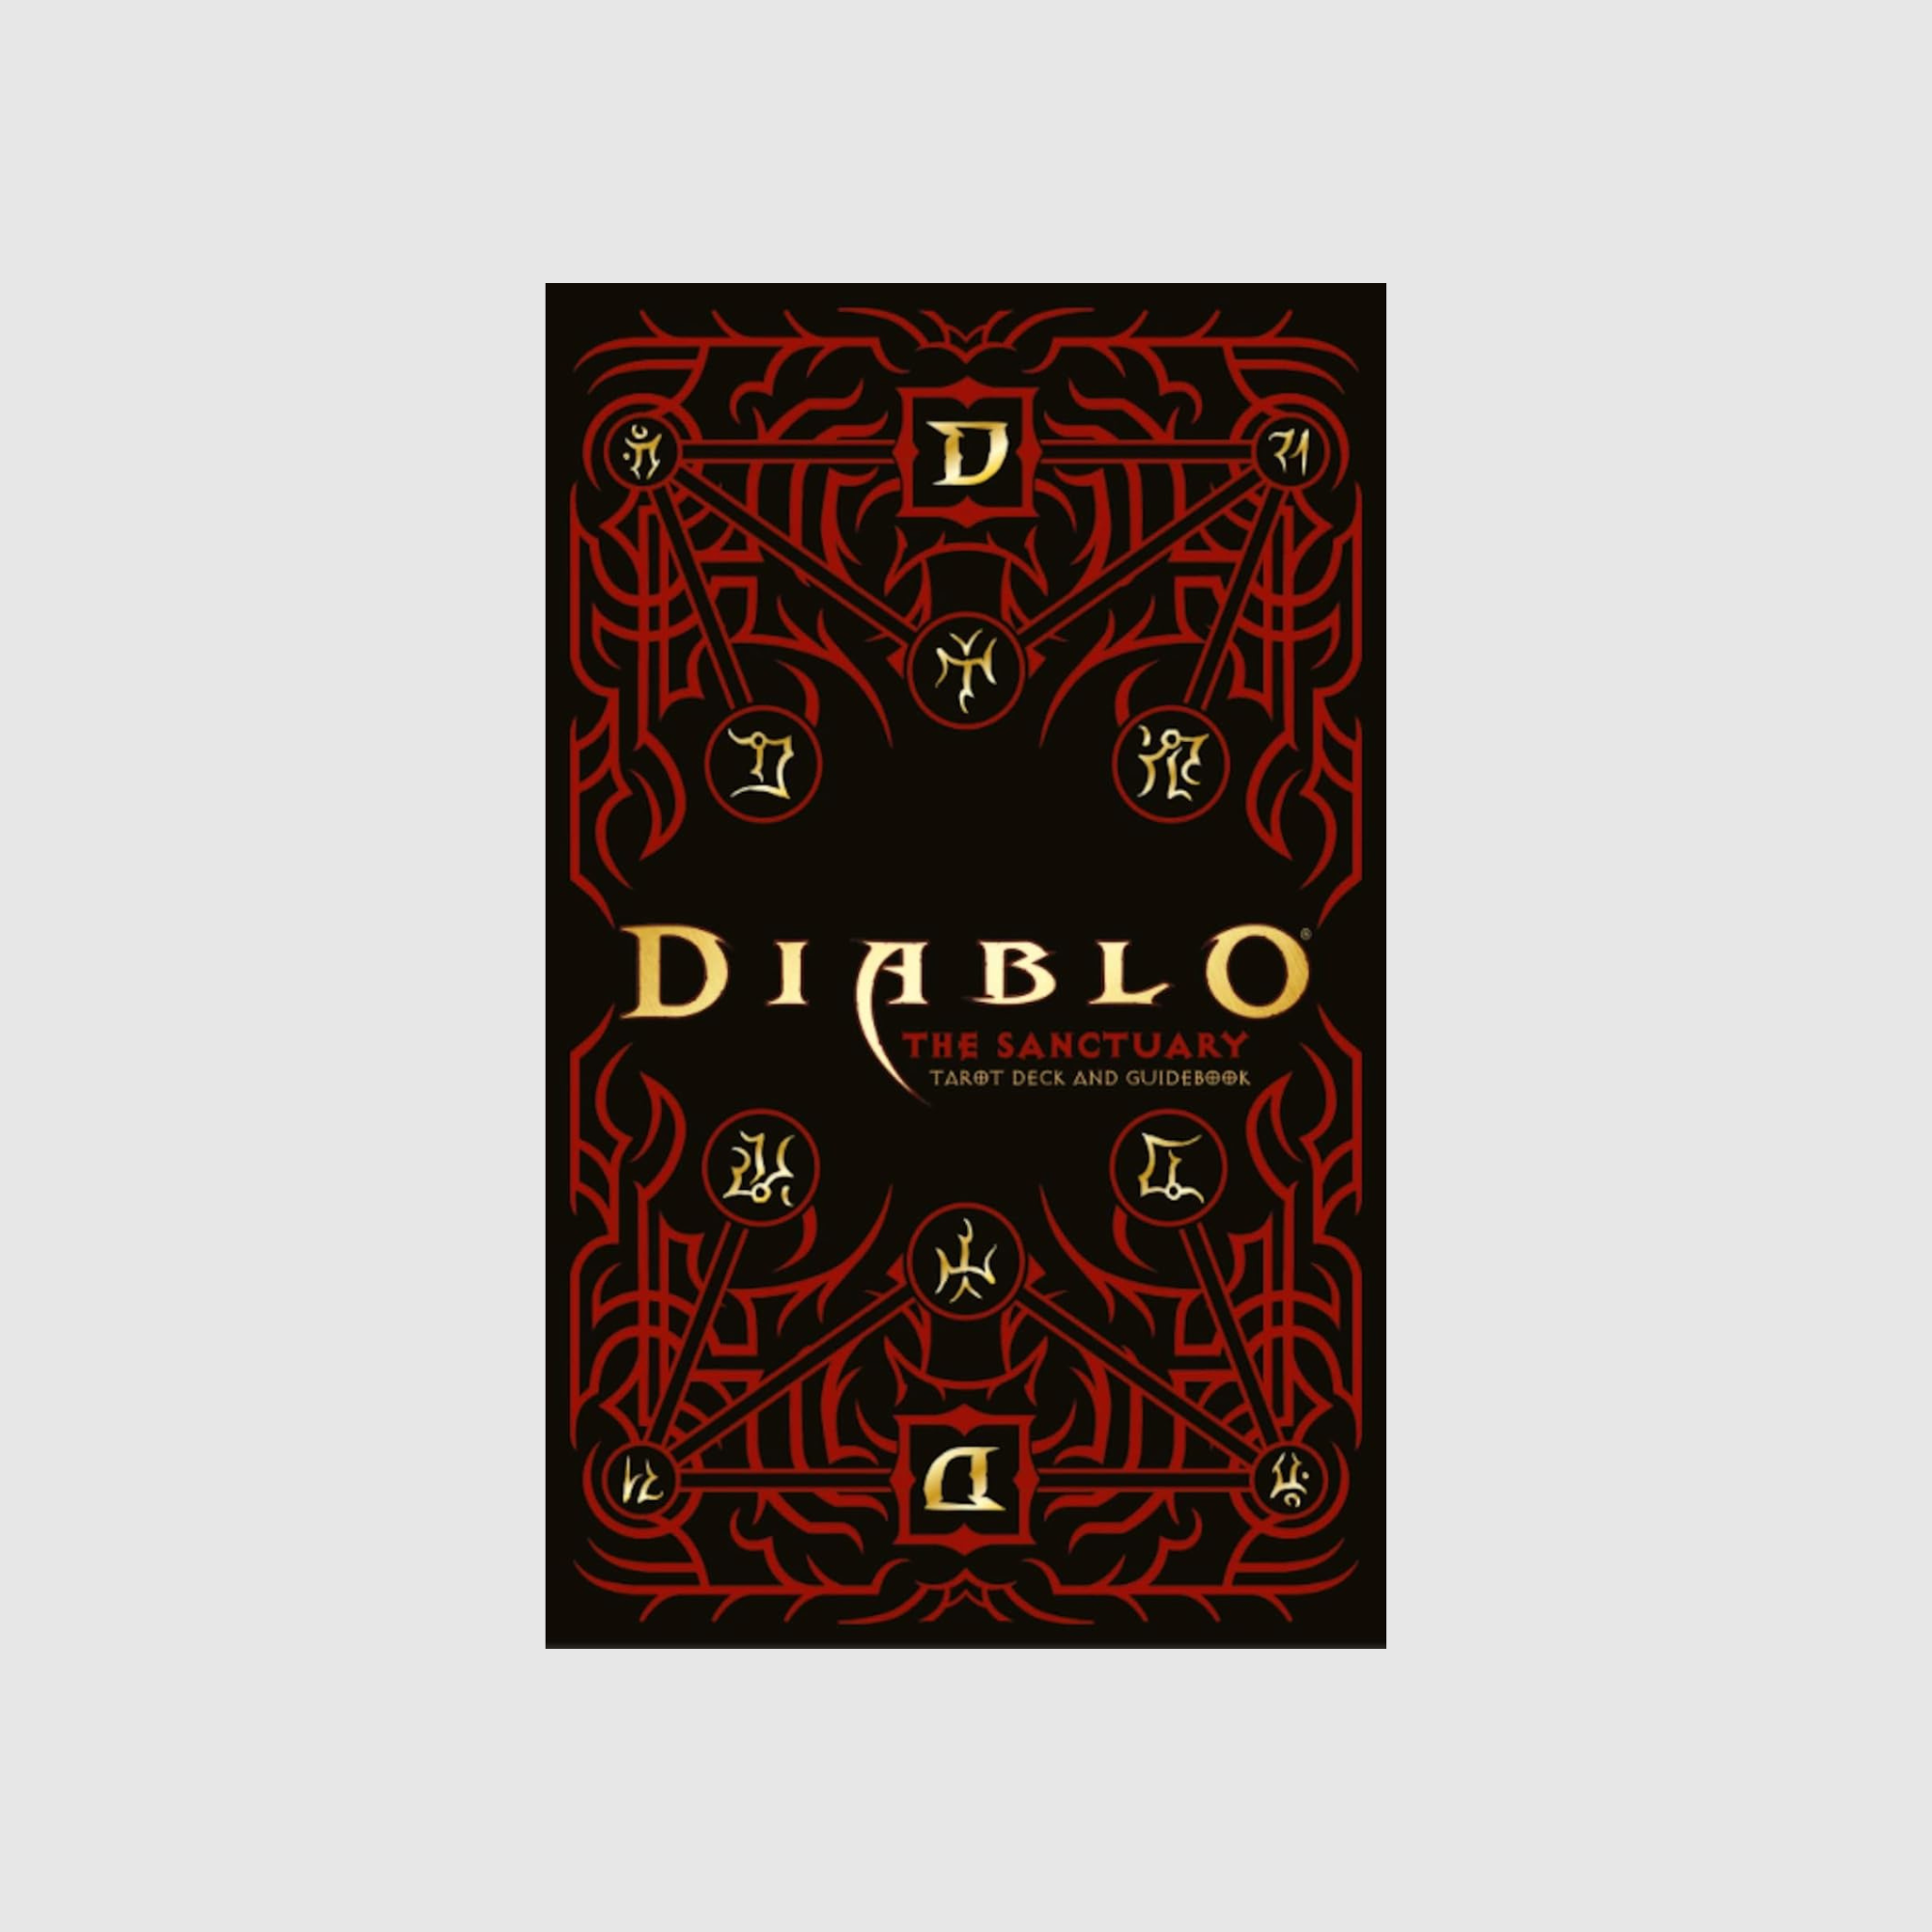 This image showcases the box design for The Sanctuary Tarot Deck and Guidebook, inspired by Blizzard Entertainment’s Diablo series. The cover features intricate red and gold artwork reflecting the dark, magical world of Sanctuary. Central to the design is the Diablo logo, with mystical symbols and patterns that evoke the essence of the game's mythos. This visually striking box art emphasizes the blend of horror and beauty that defines the Sanctuary tarot set.